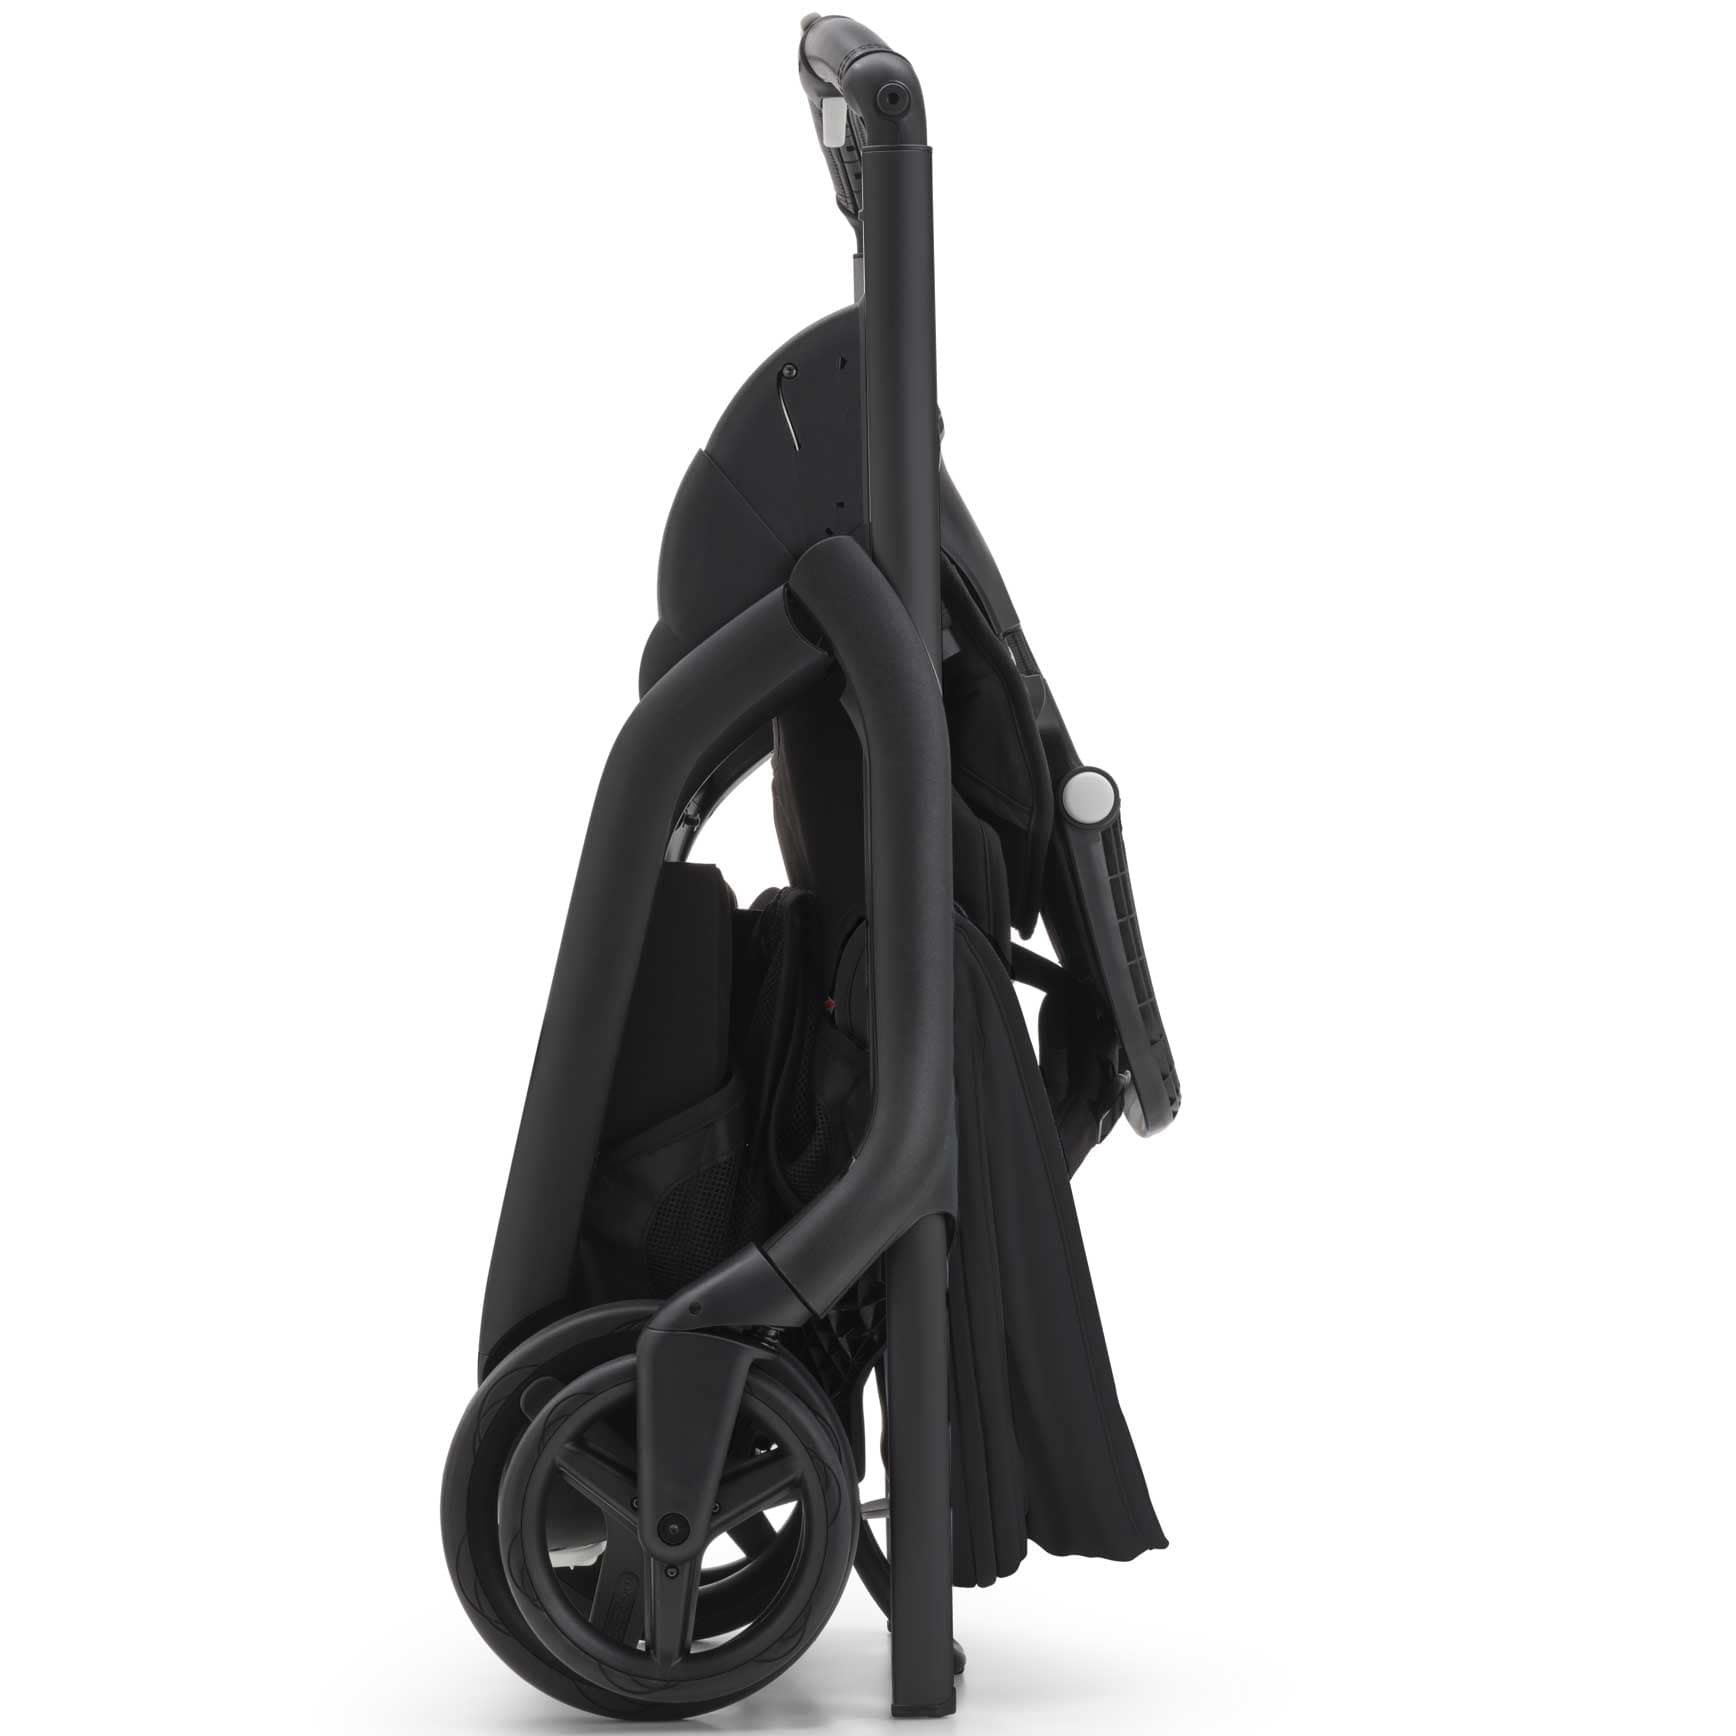 Bugaboo Dragonfly Ultimate Bundle - Black/Midnight Black Travel Systems 13809-BLK-MID-BLK 8717447448044